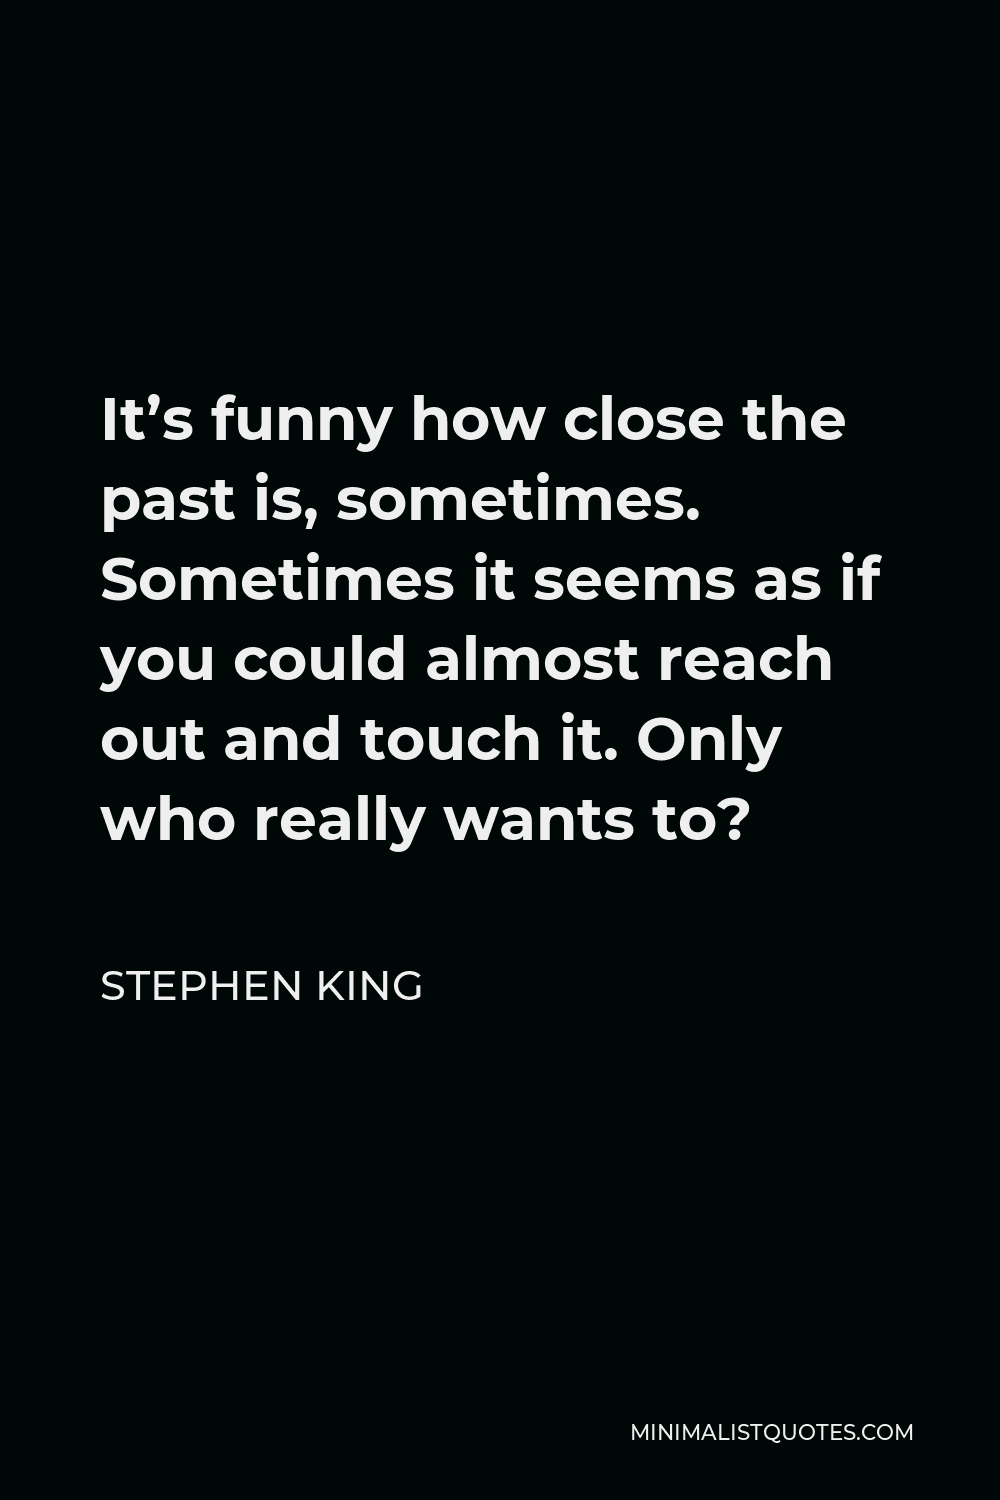 Stephen King Quote - It’s funny how close the past is, sometimes. Sometimes it seems as if you could almost reach out and touch it. Only who really wants to?